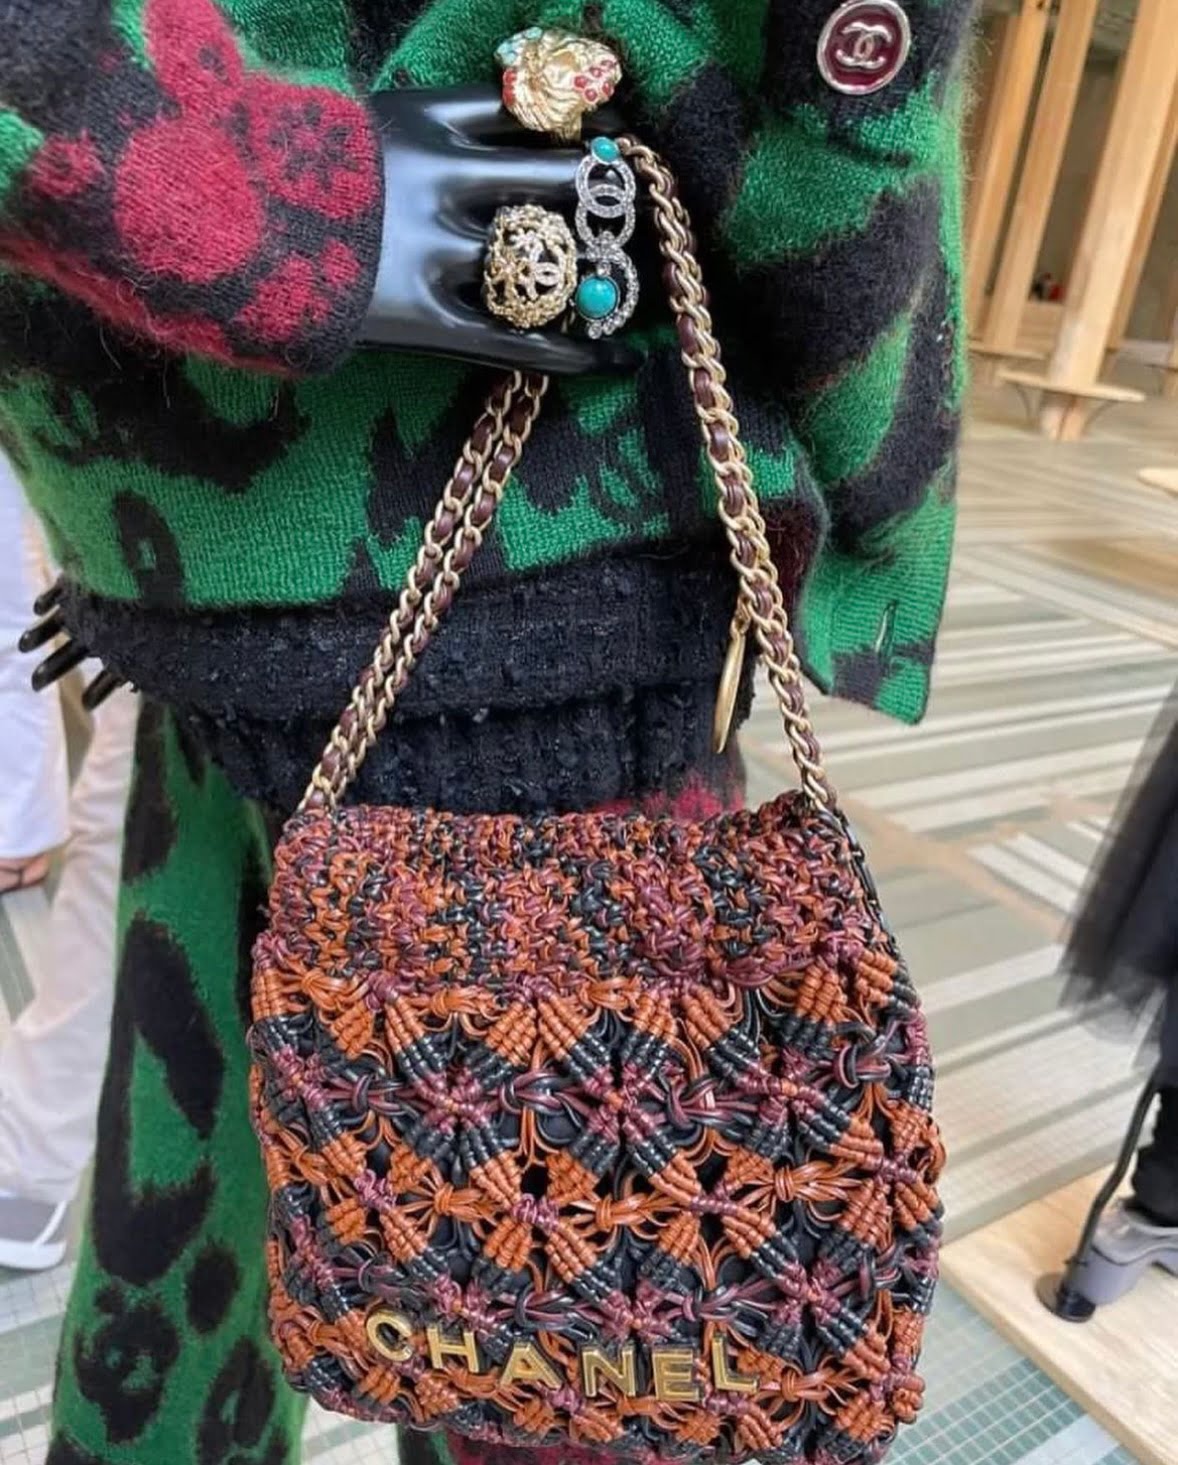 Chanel 2022/23 Métiers d'art Collection Is Big on Bags - Large and